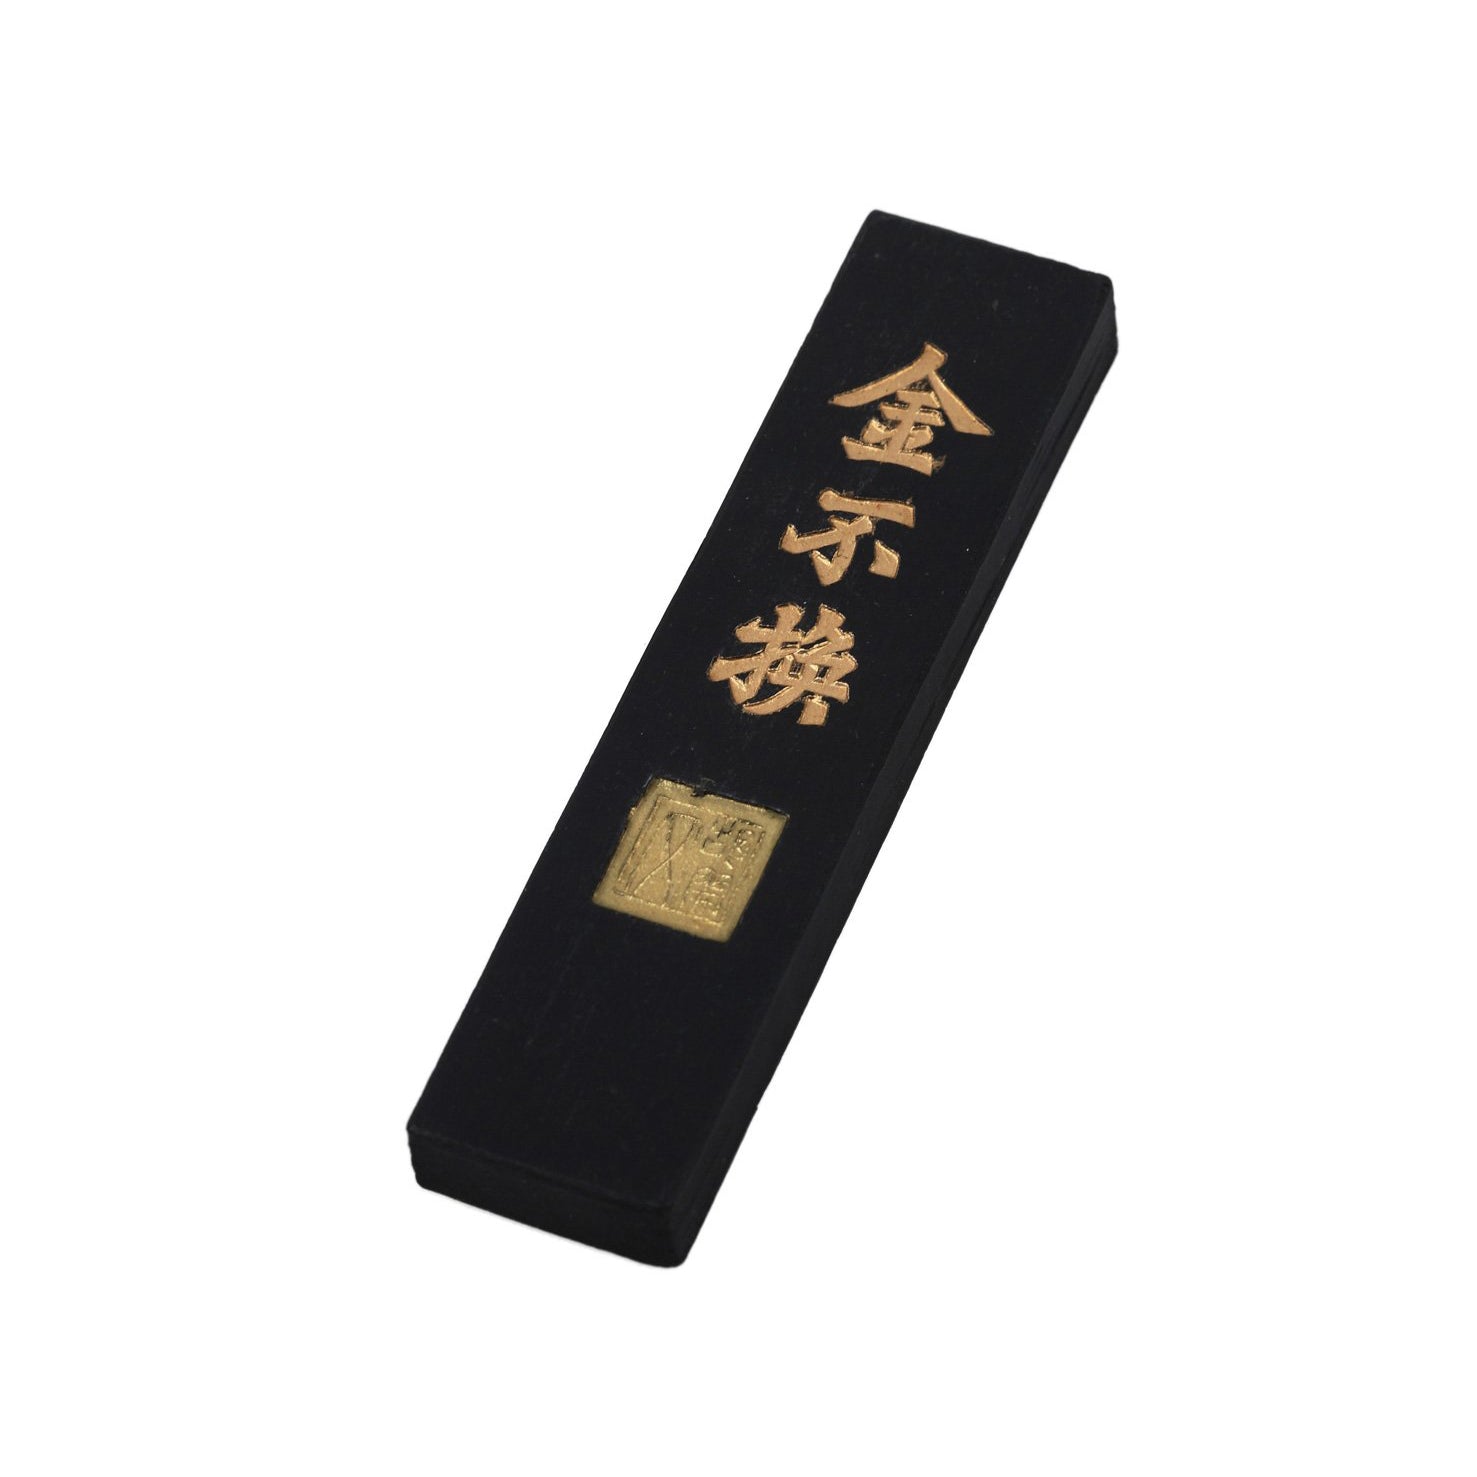 Chinese practice calligraphy, shodo, kanji and sumi ink stick with the manufacturer name carved into the black body of the ink stick.